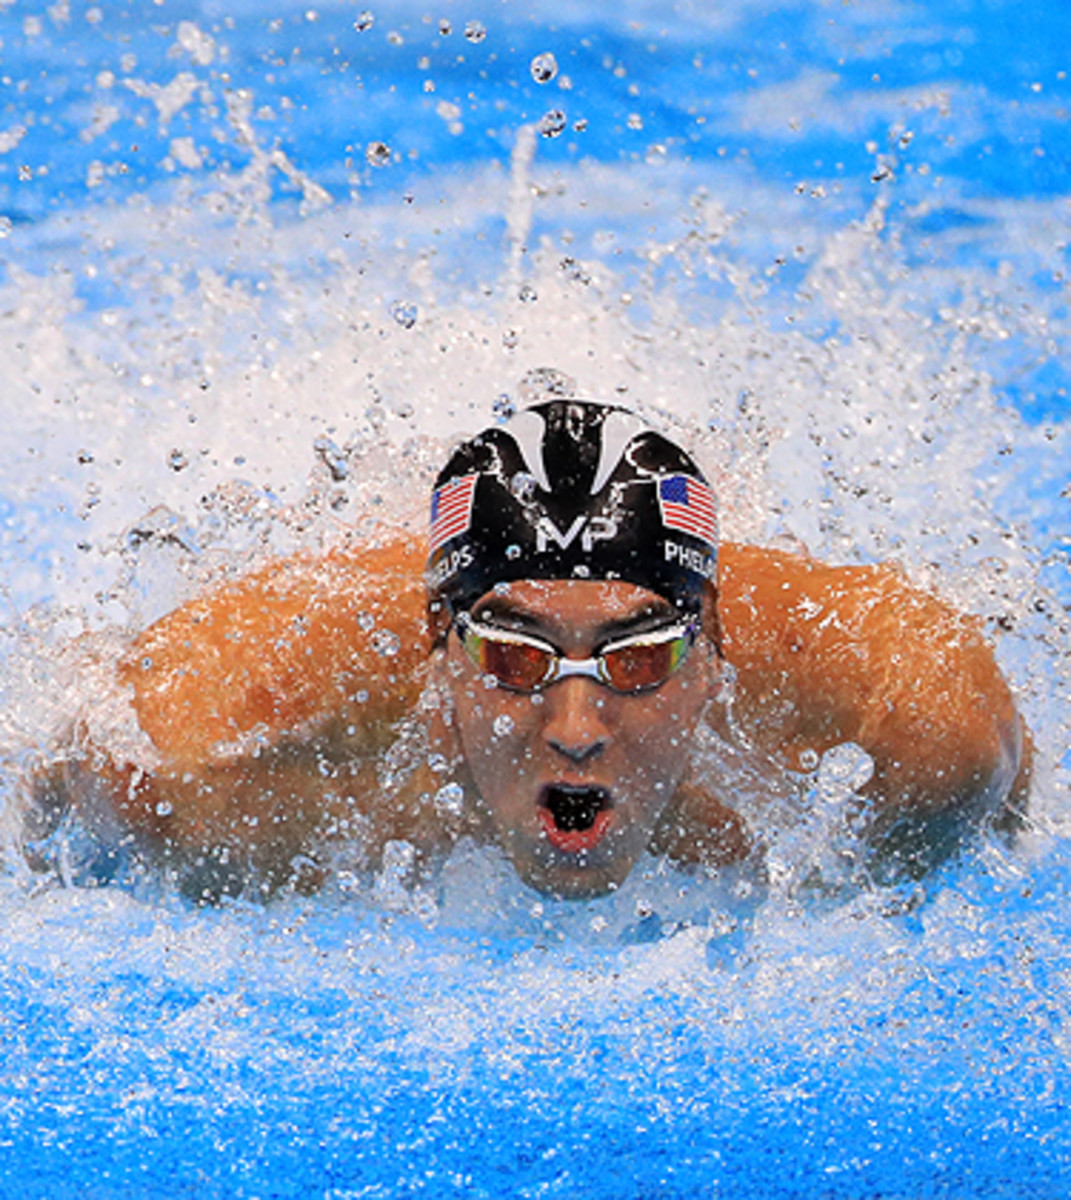 Michael Phelps holds the record for most career gold medals (23) by any Olympian in history.